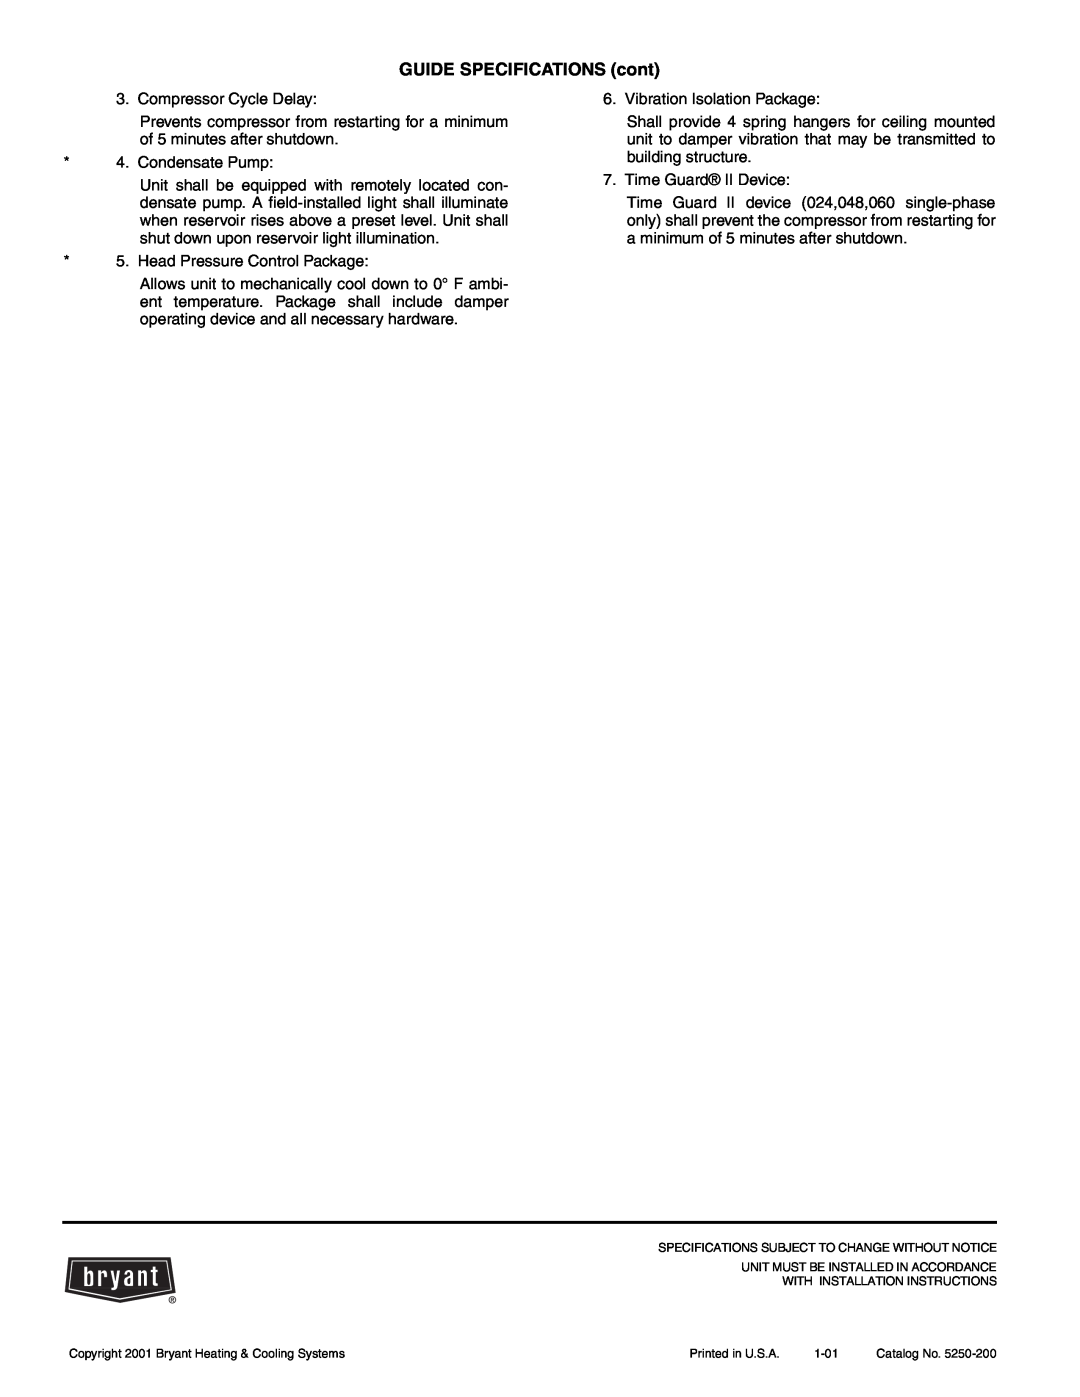 Bryant 502A manual GUIDE SPECIFICATIONS cont 